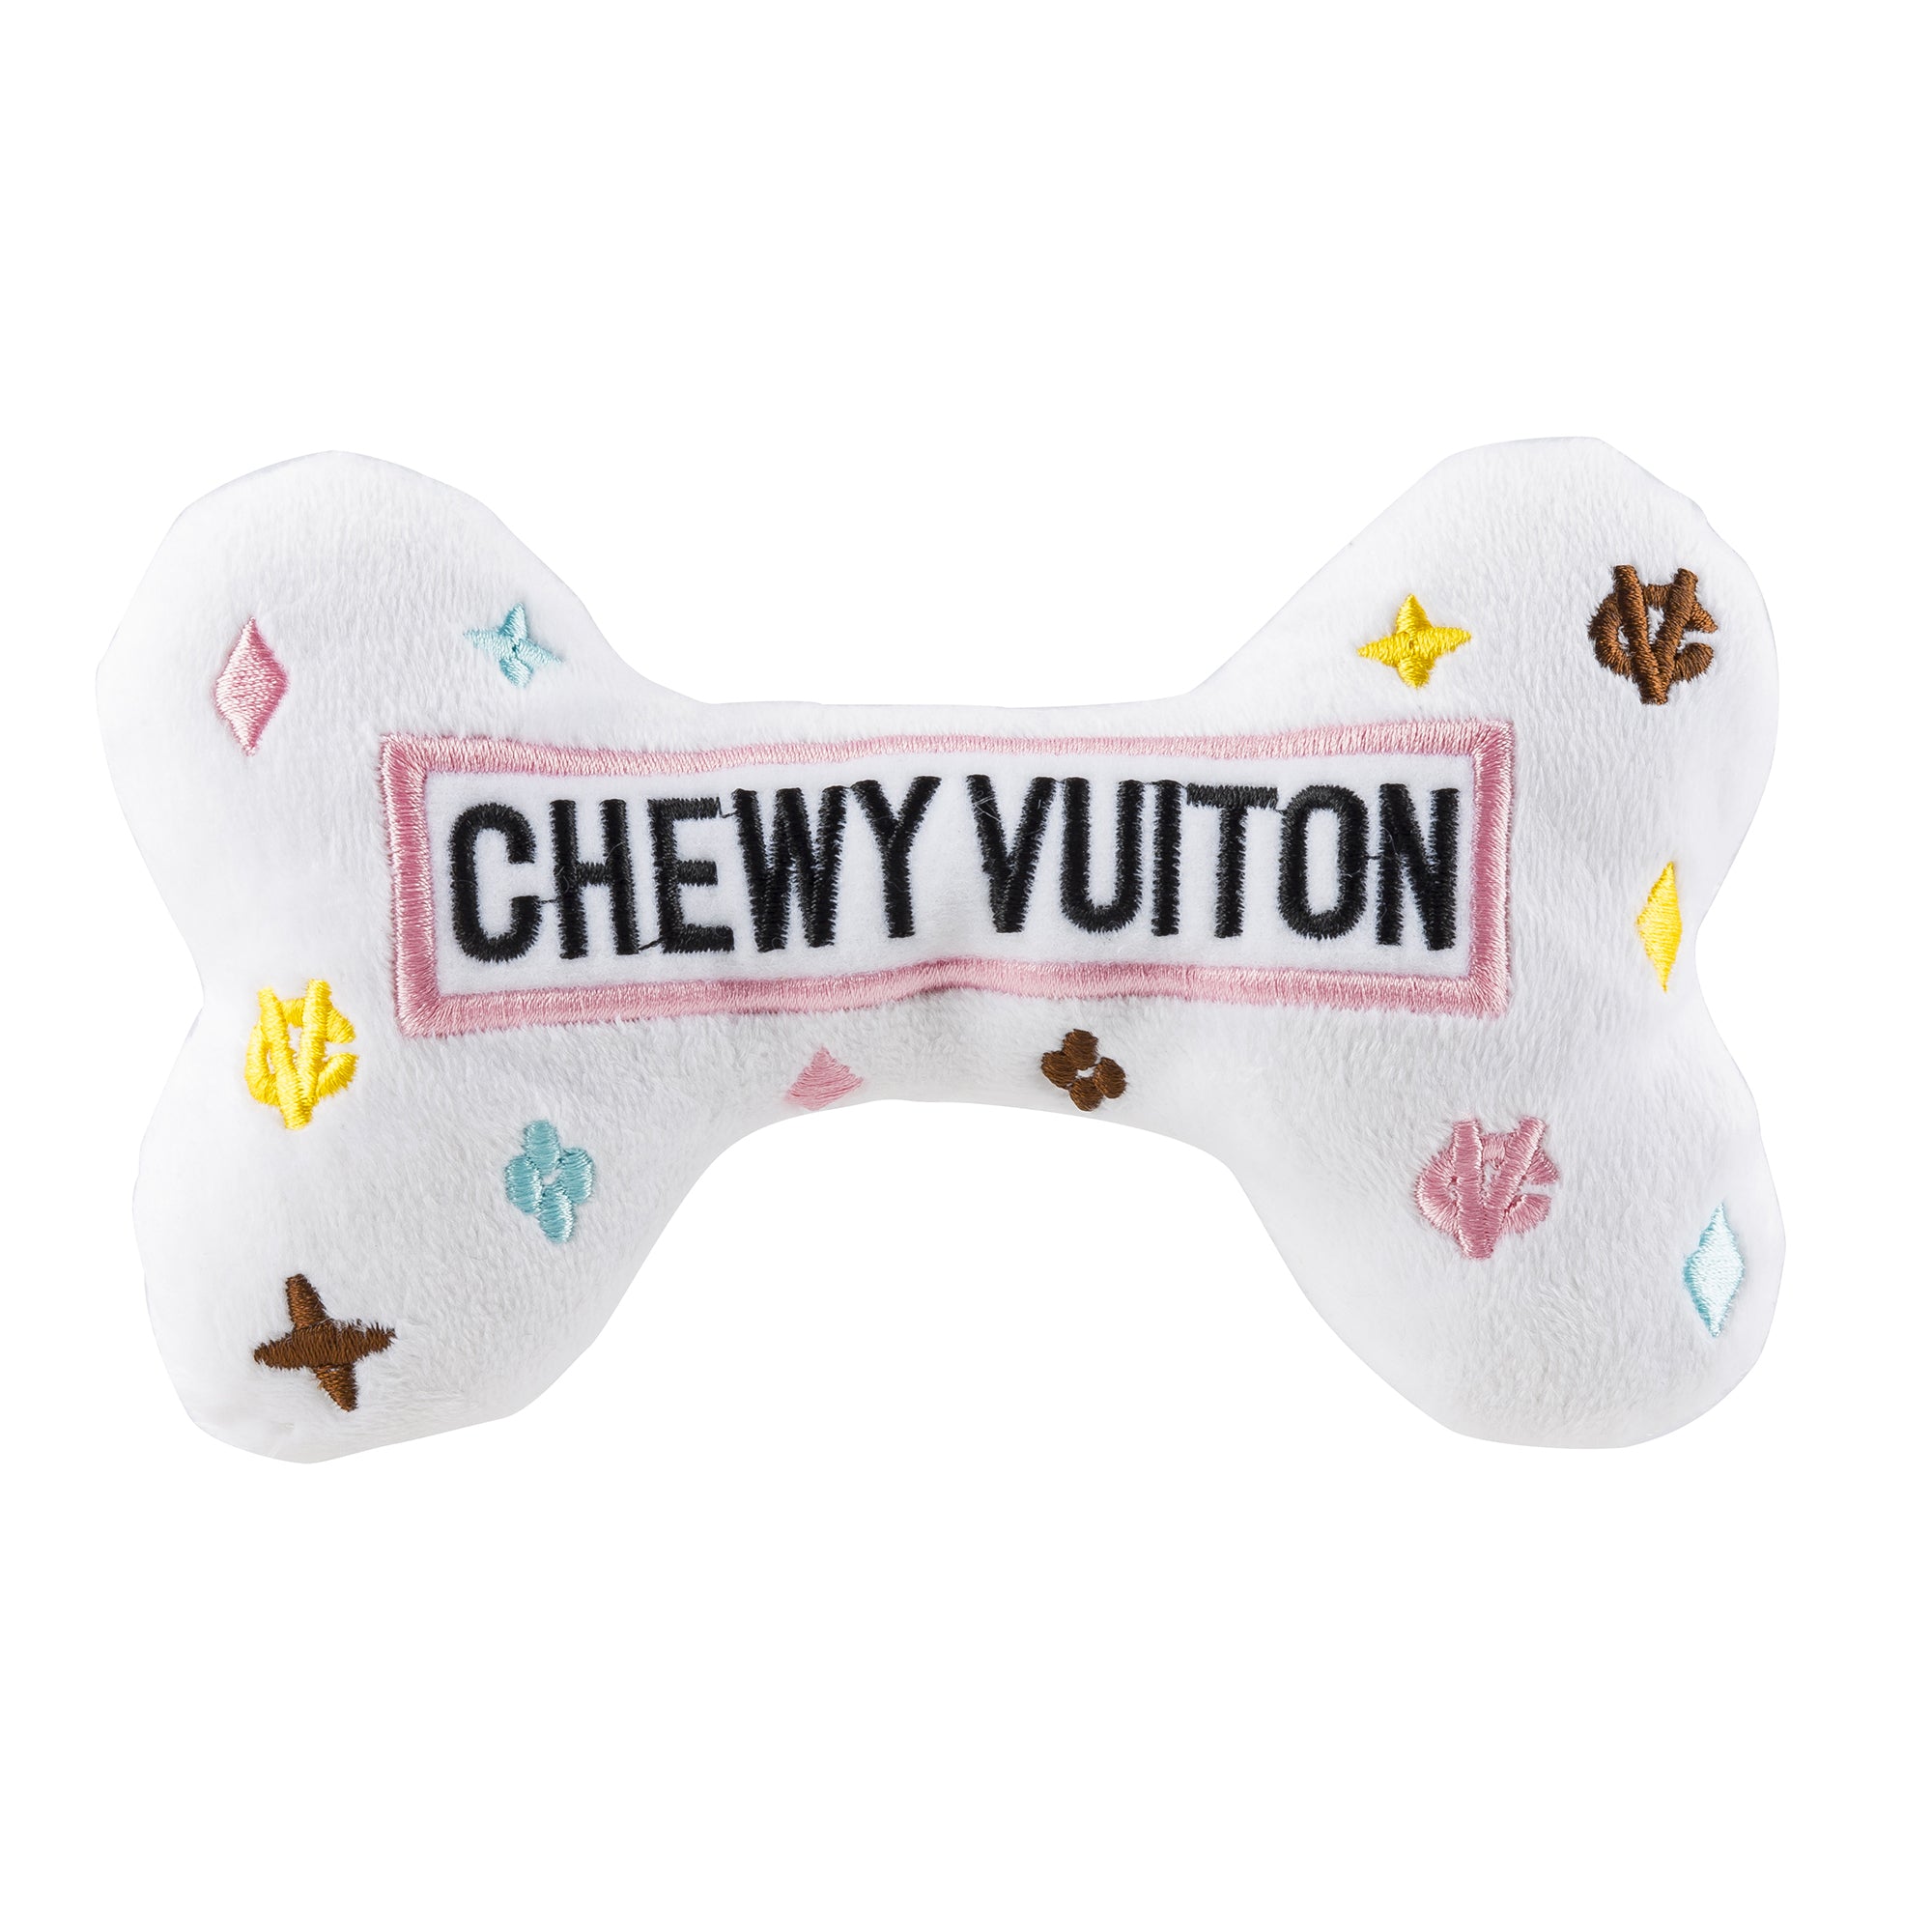 Chewy Vuitton Products - Designer4Dogs